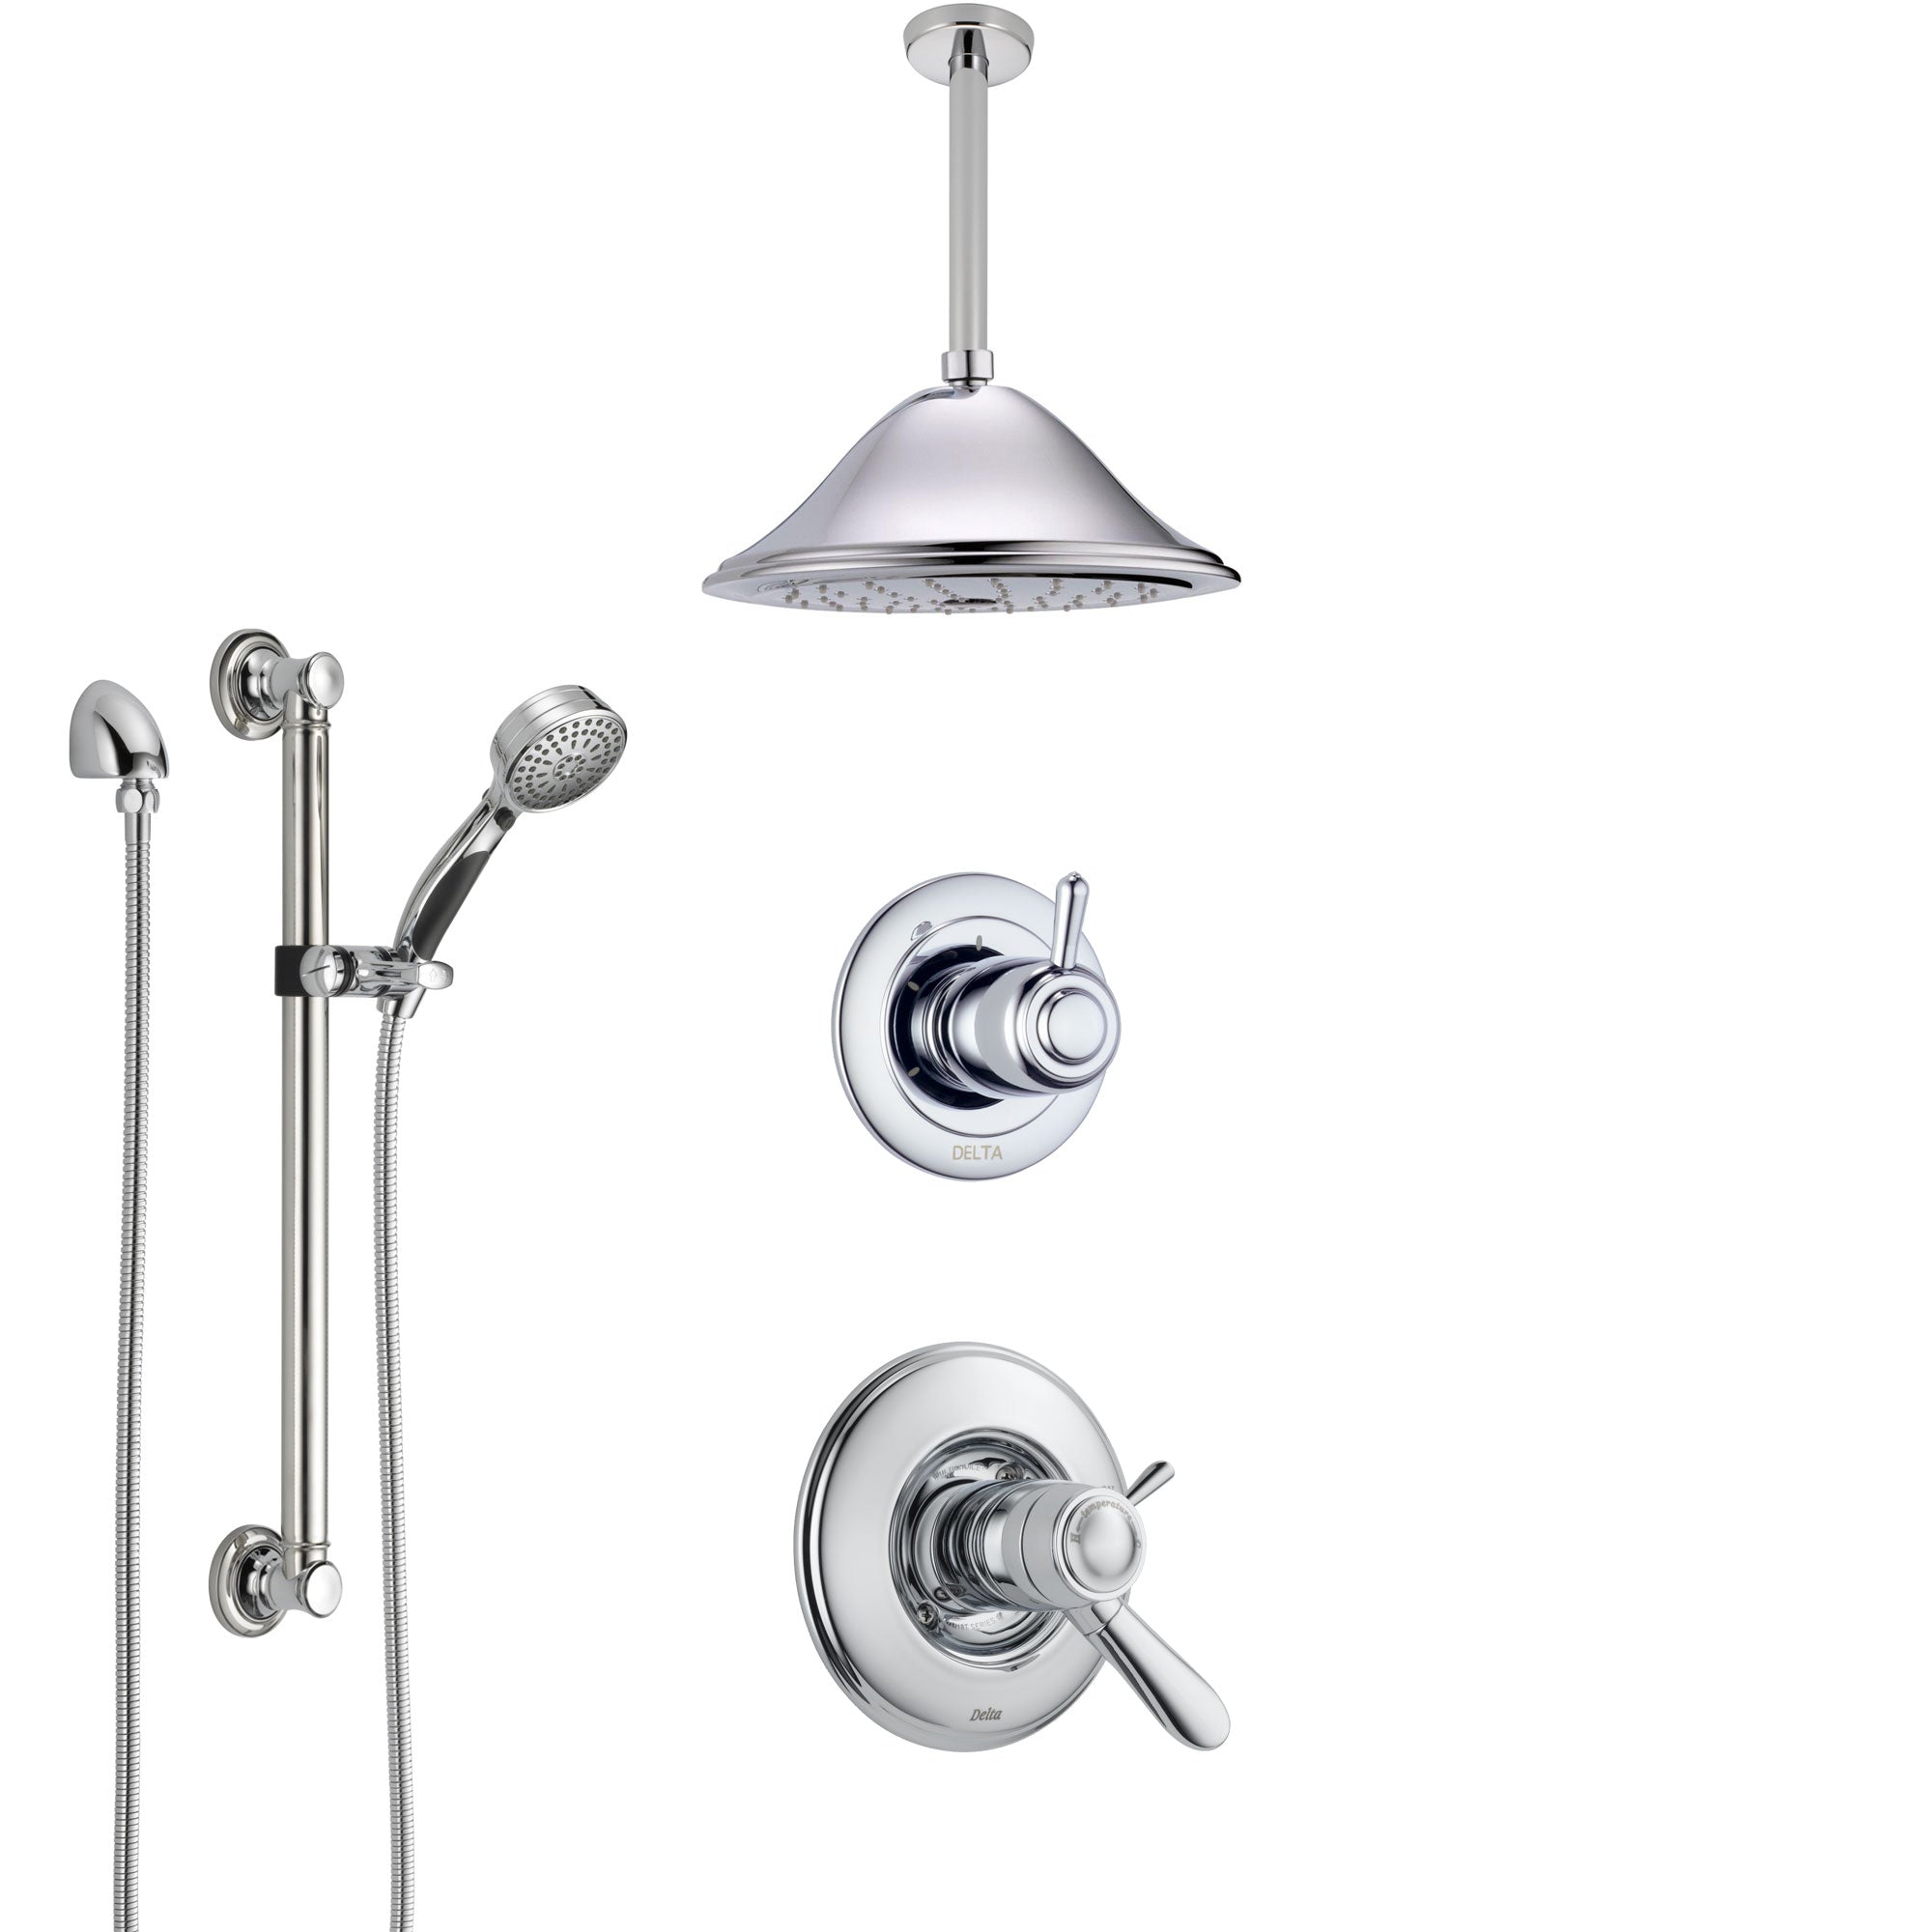 Delta Lahara Chrome Shower System with Dual Thermostatic Control Handle, Diverter, Ceiling Mount Showerhead, and Hand Shower with Grab Bar SS17T3816